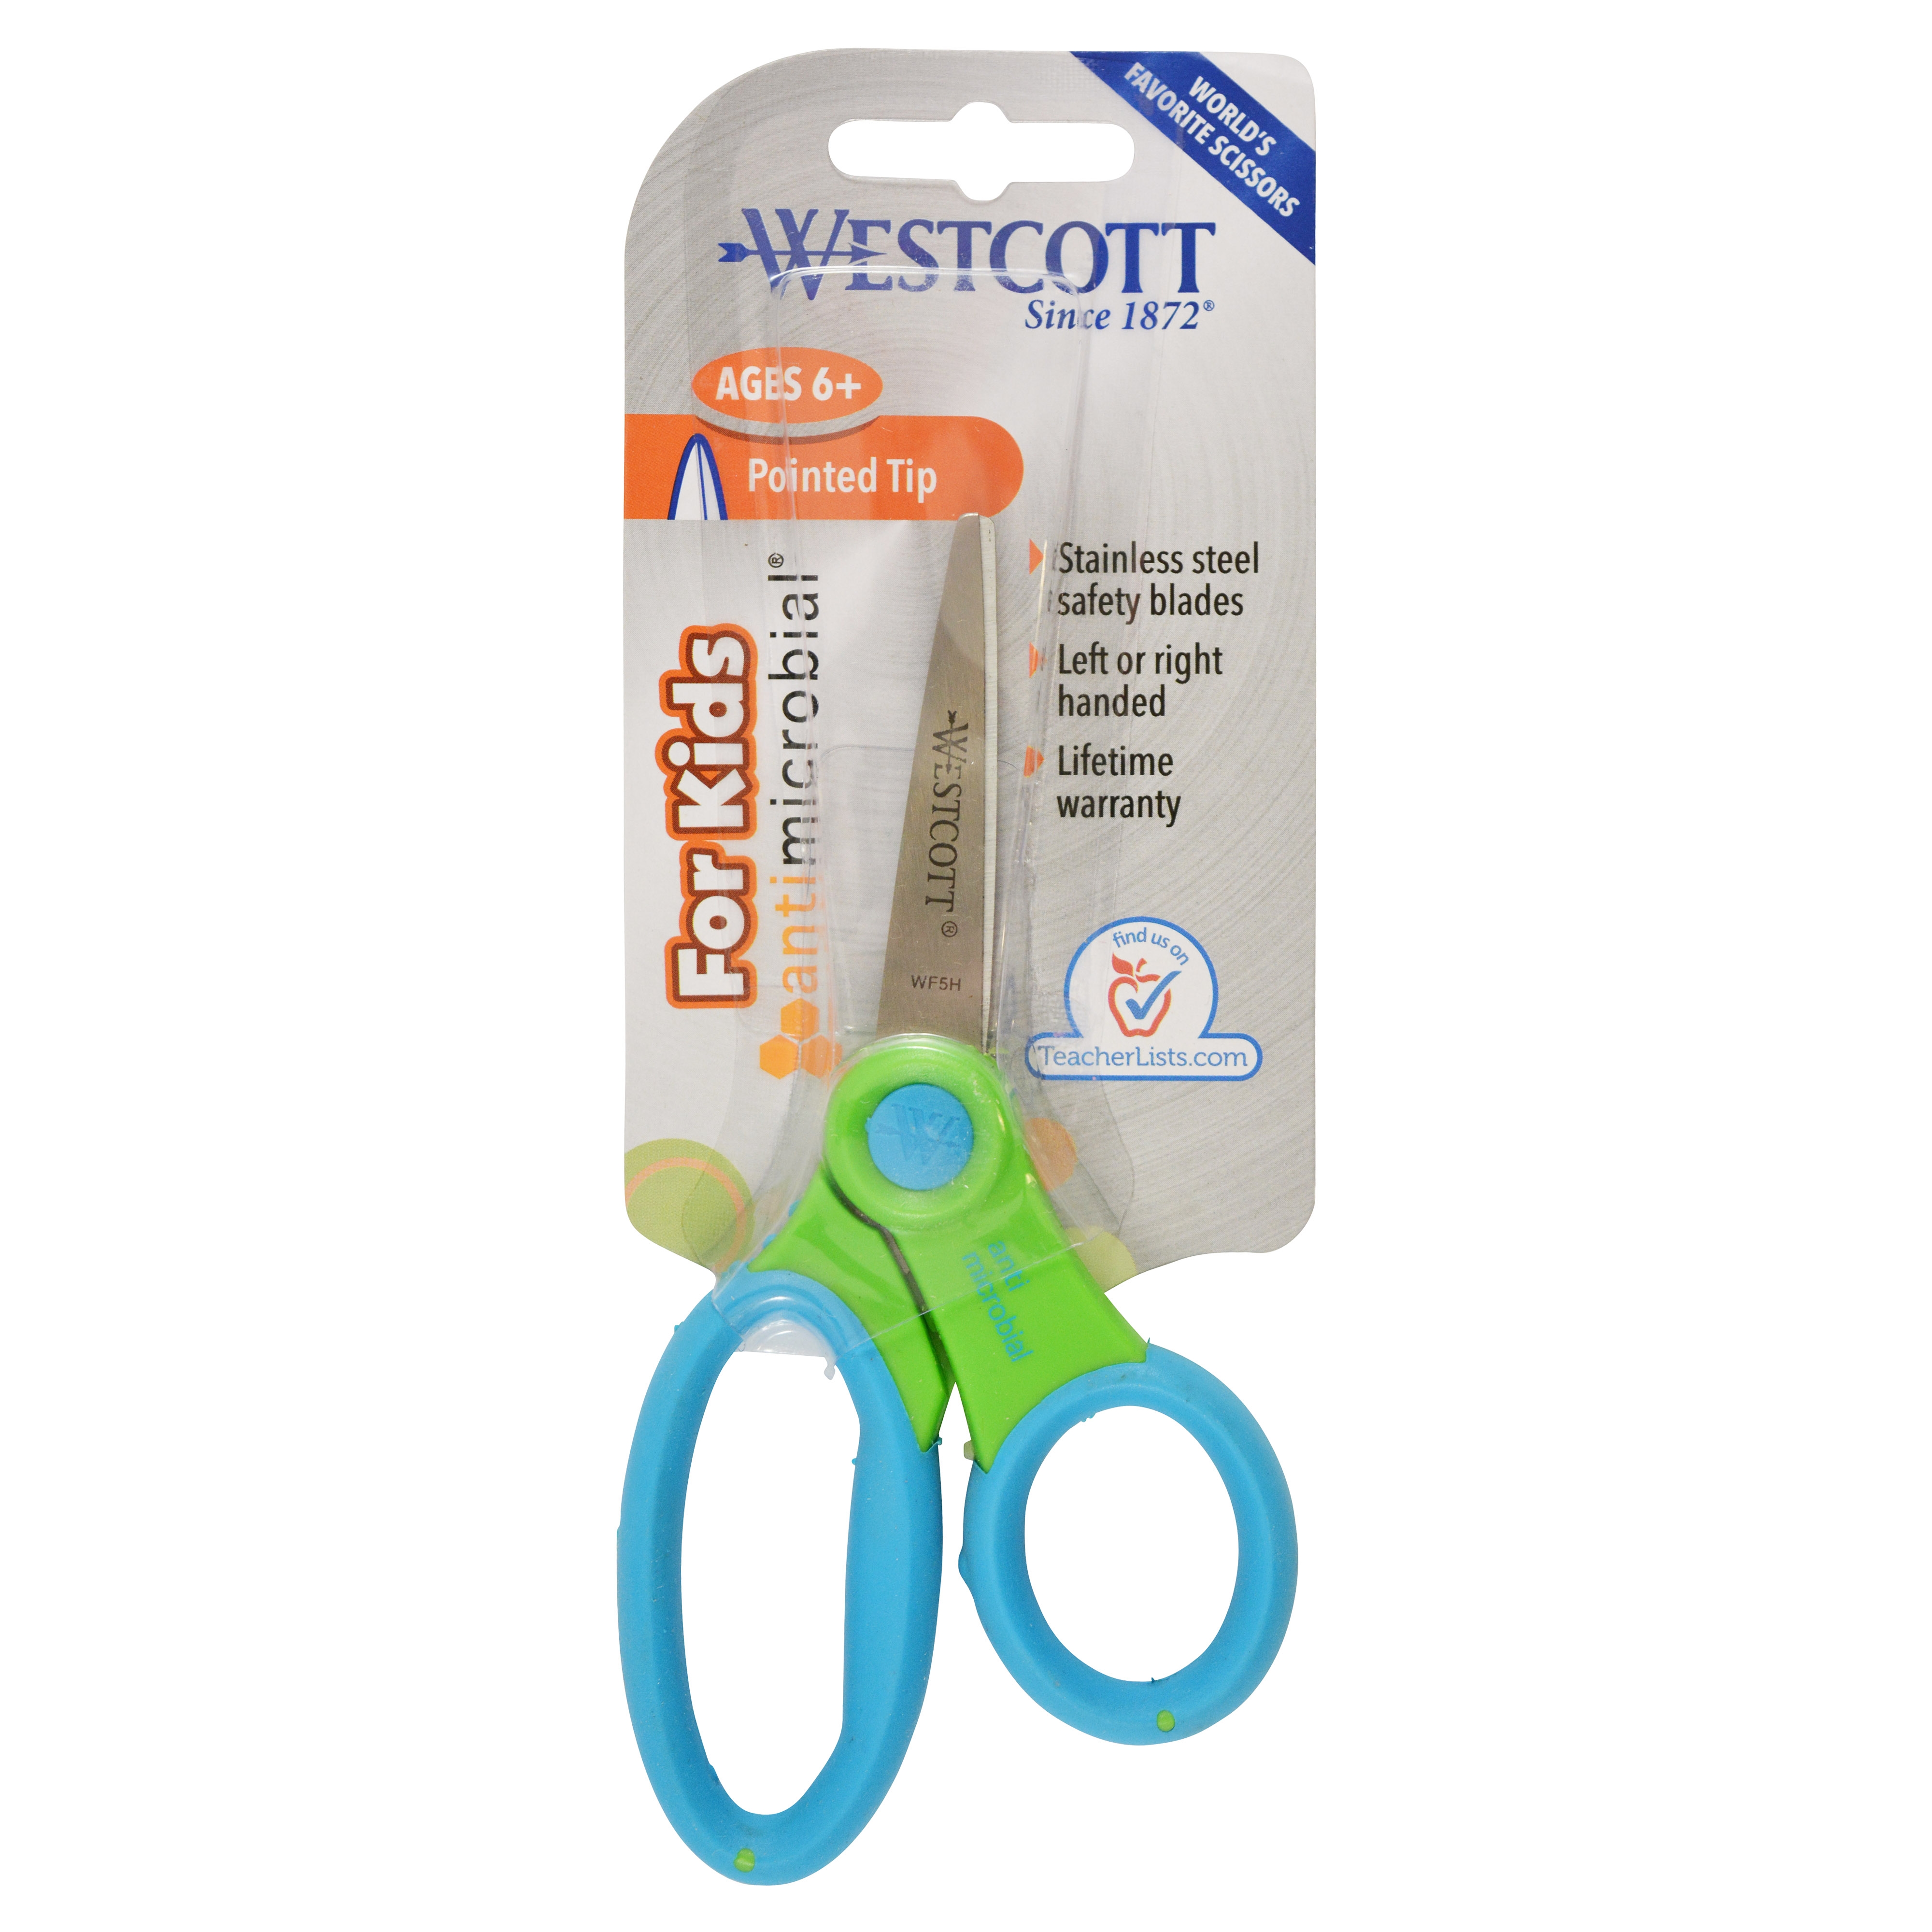 Westcott 5" Scissors with Anti-Microbial Protection, Pointed (14597)